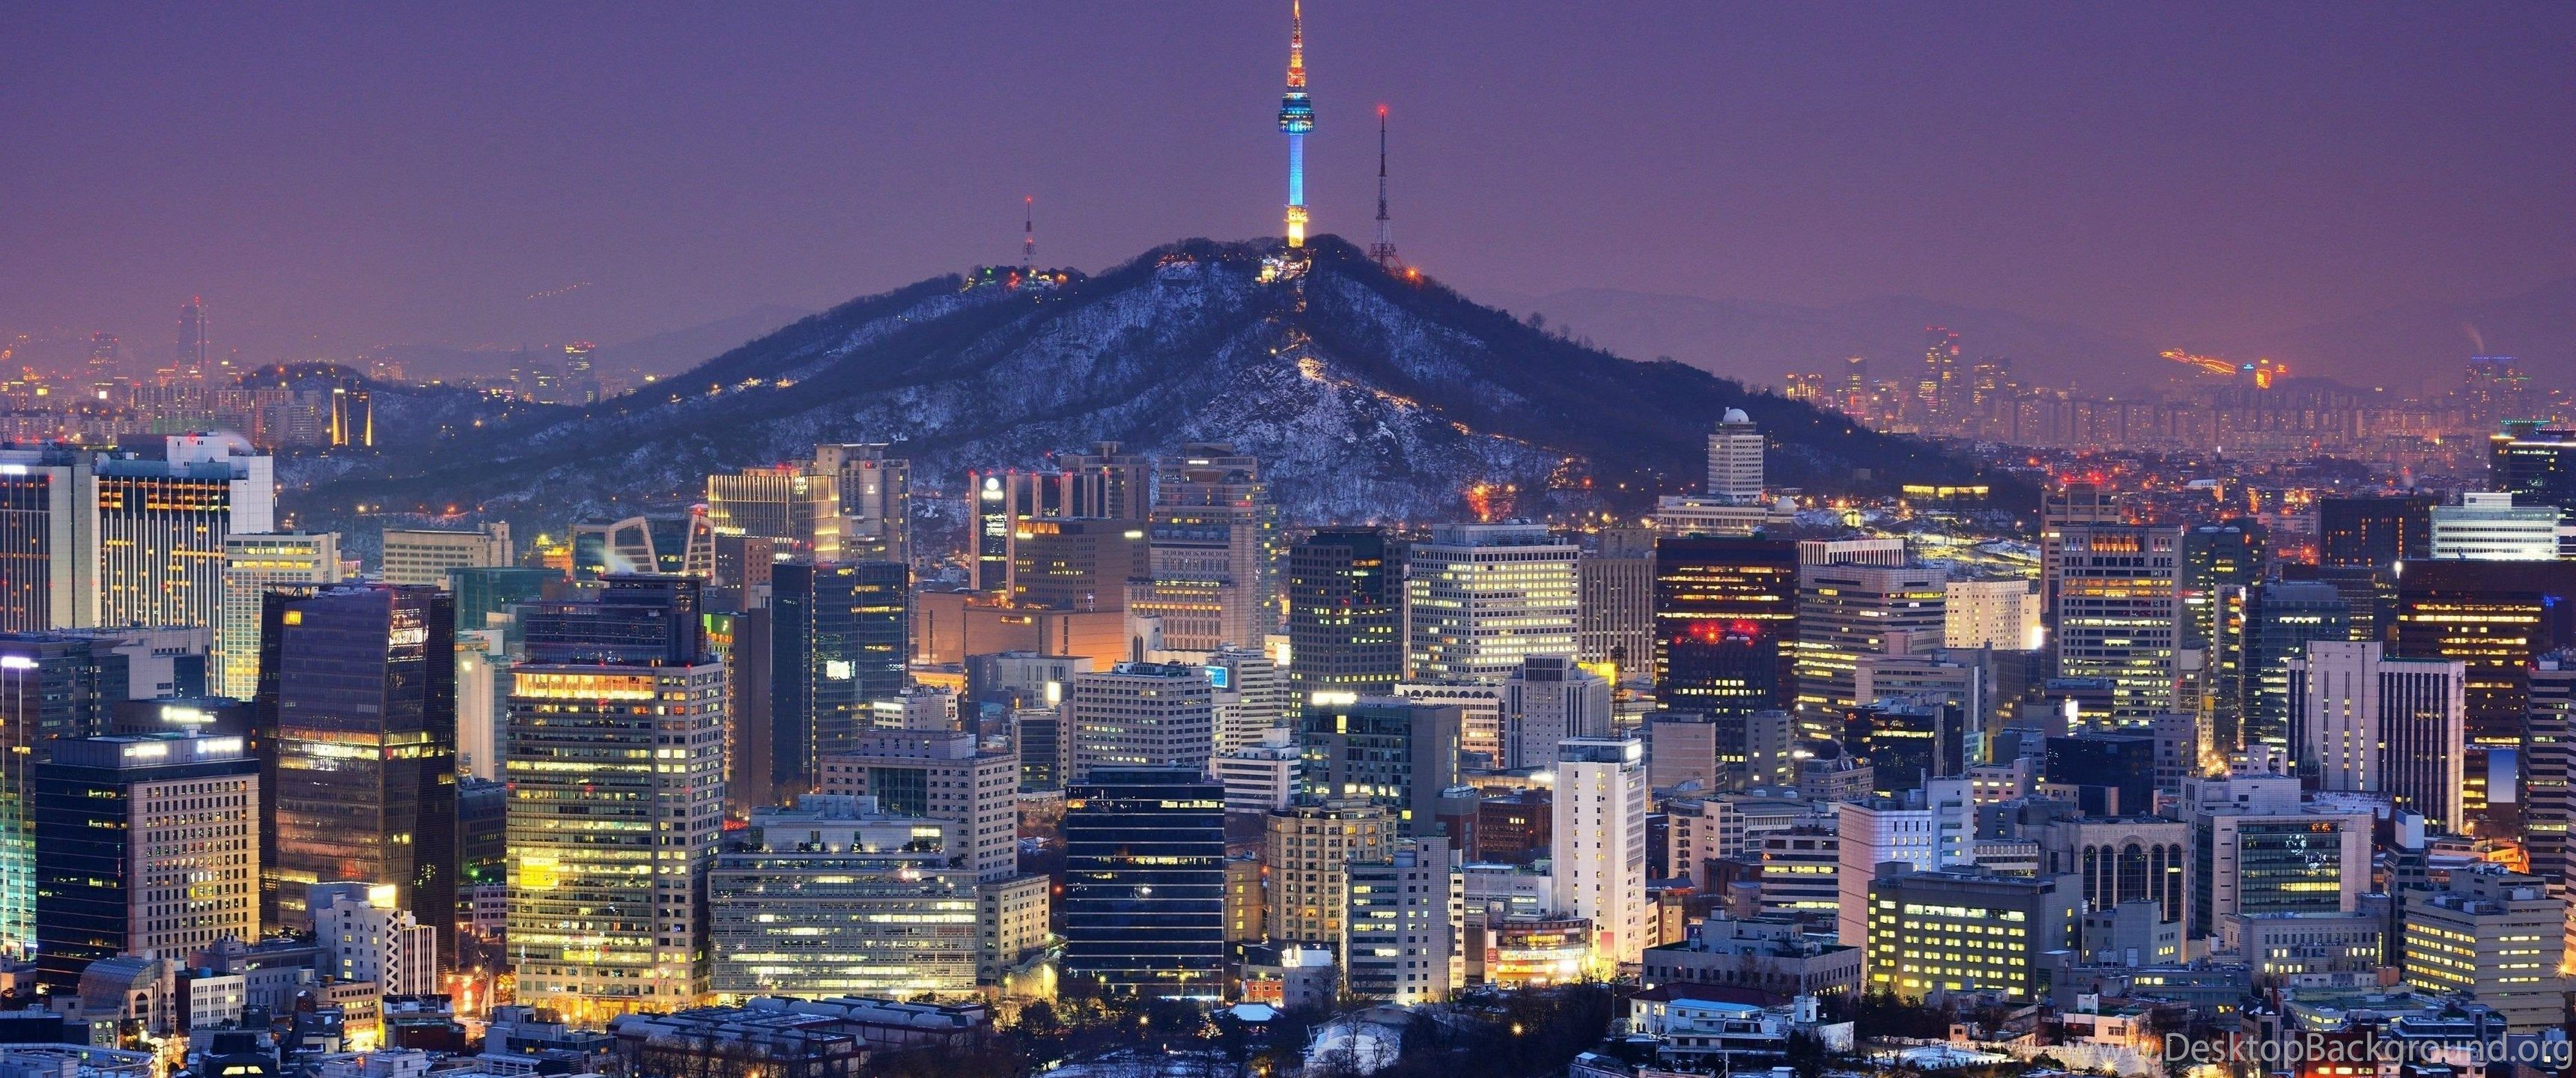 Seoul South Korea HD Wallpaper For Your PC, Mac Or Mobile Device Desktop Background